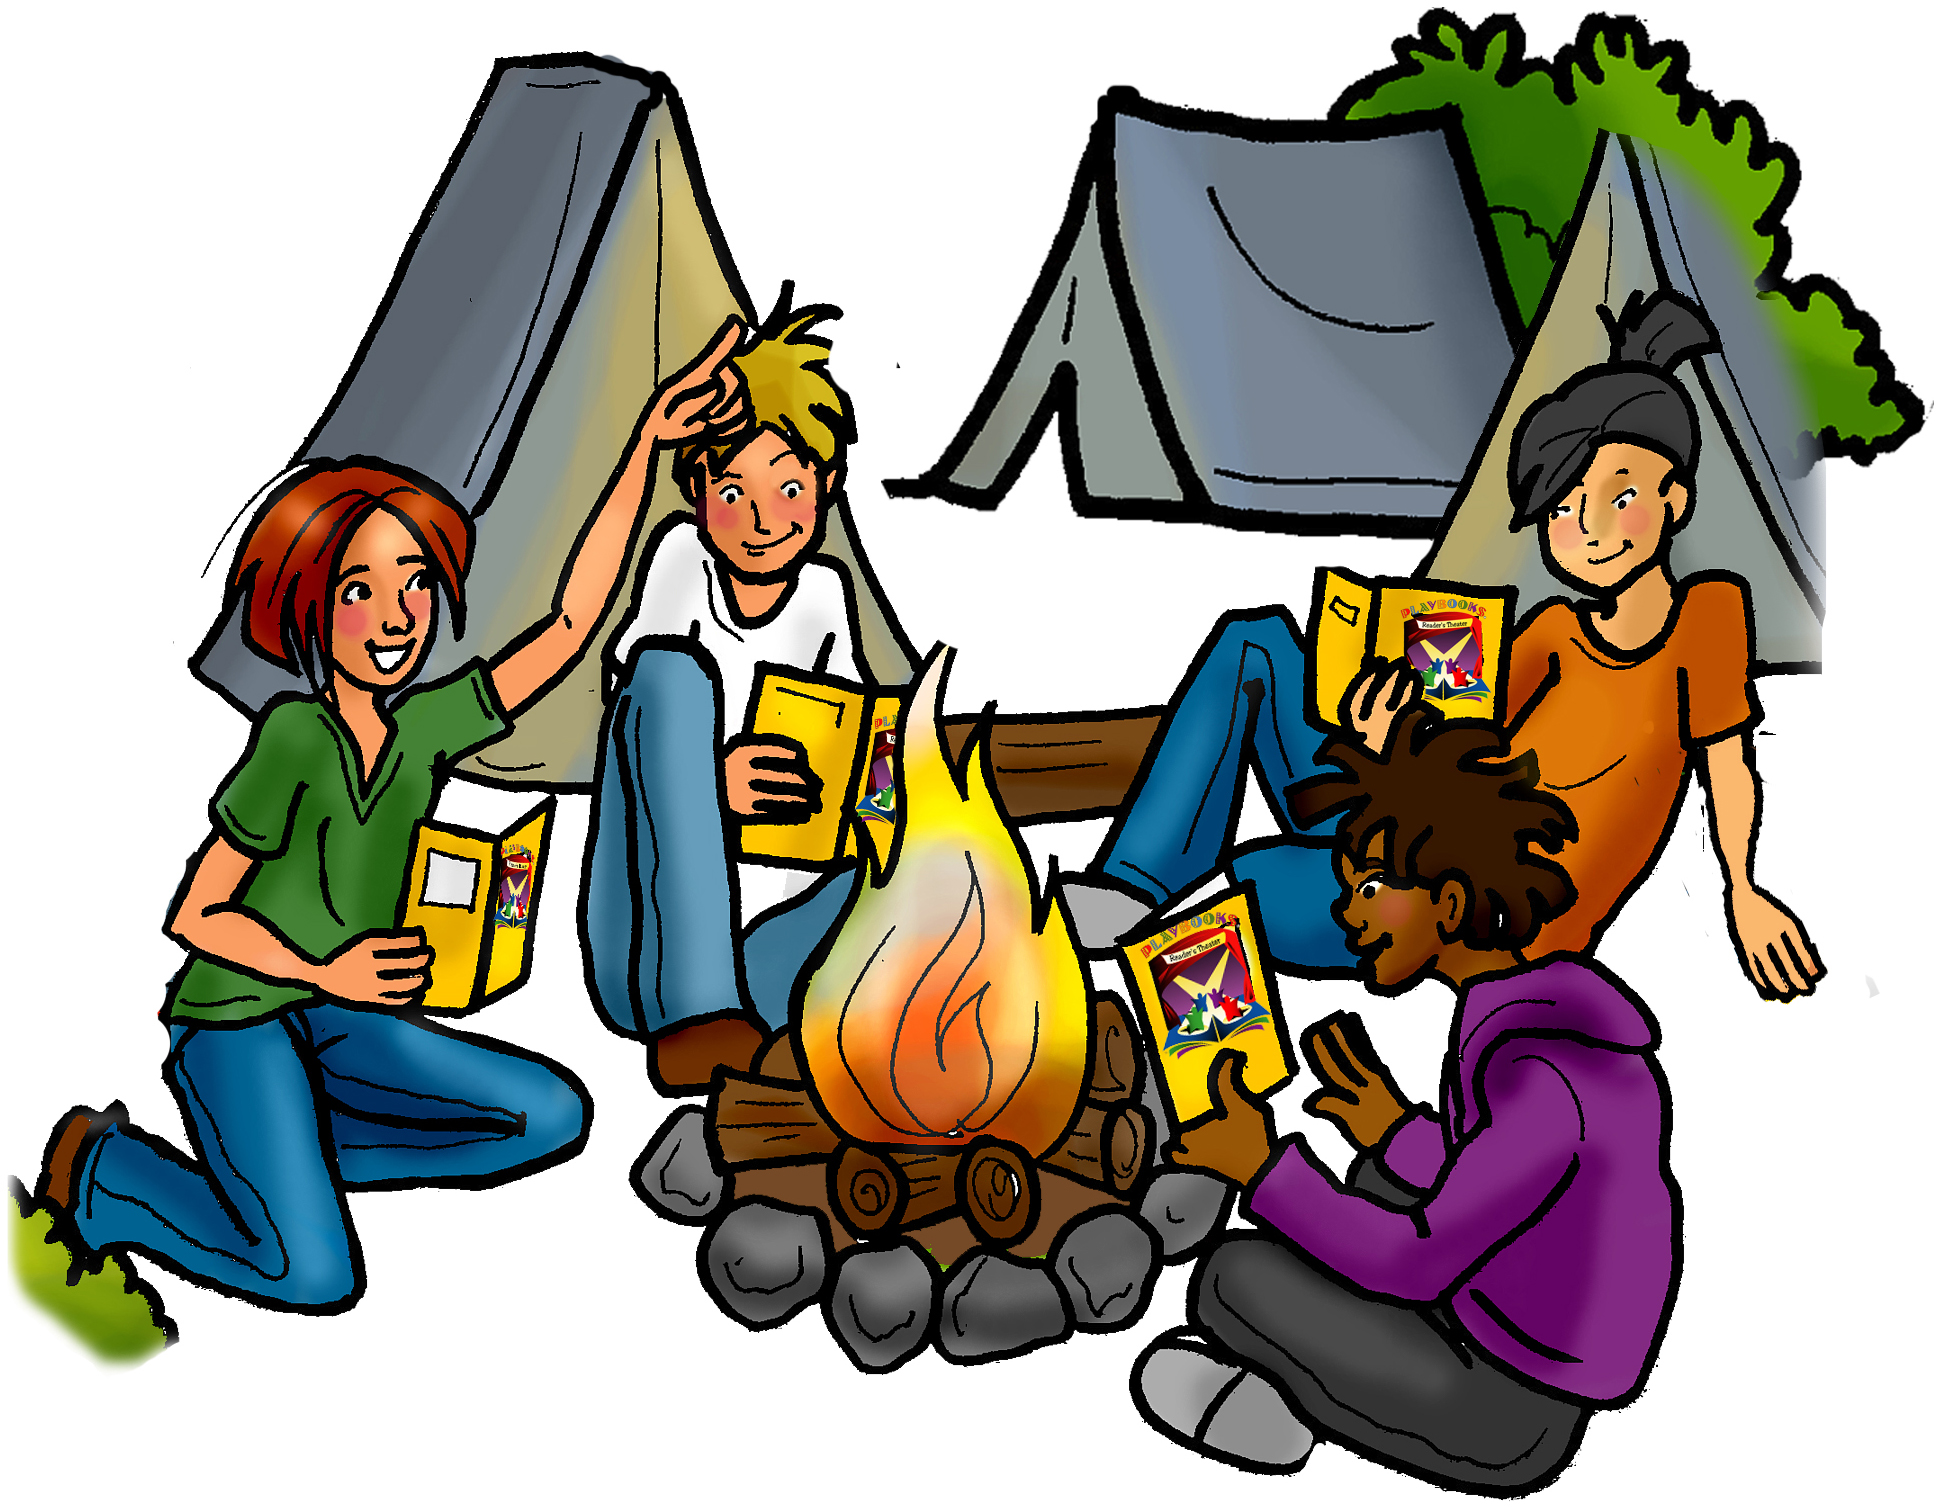 Camping kids camp clip art clipart image 0 - Cliparting.com